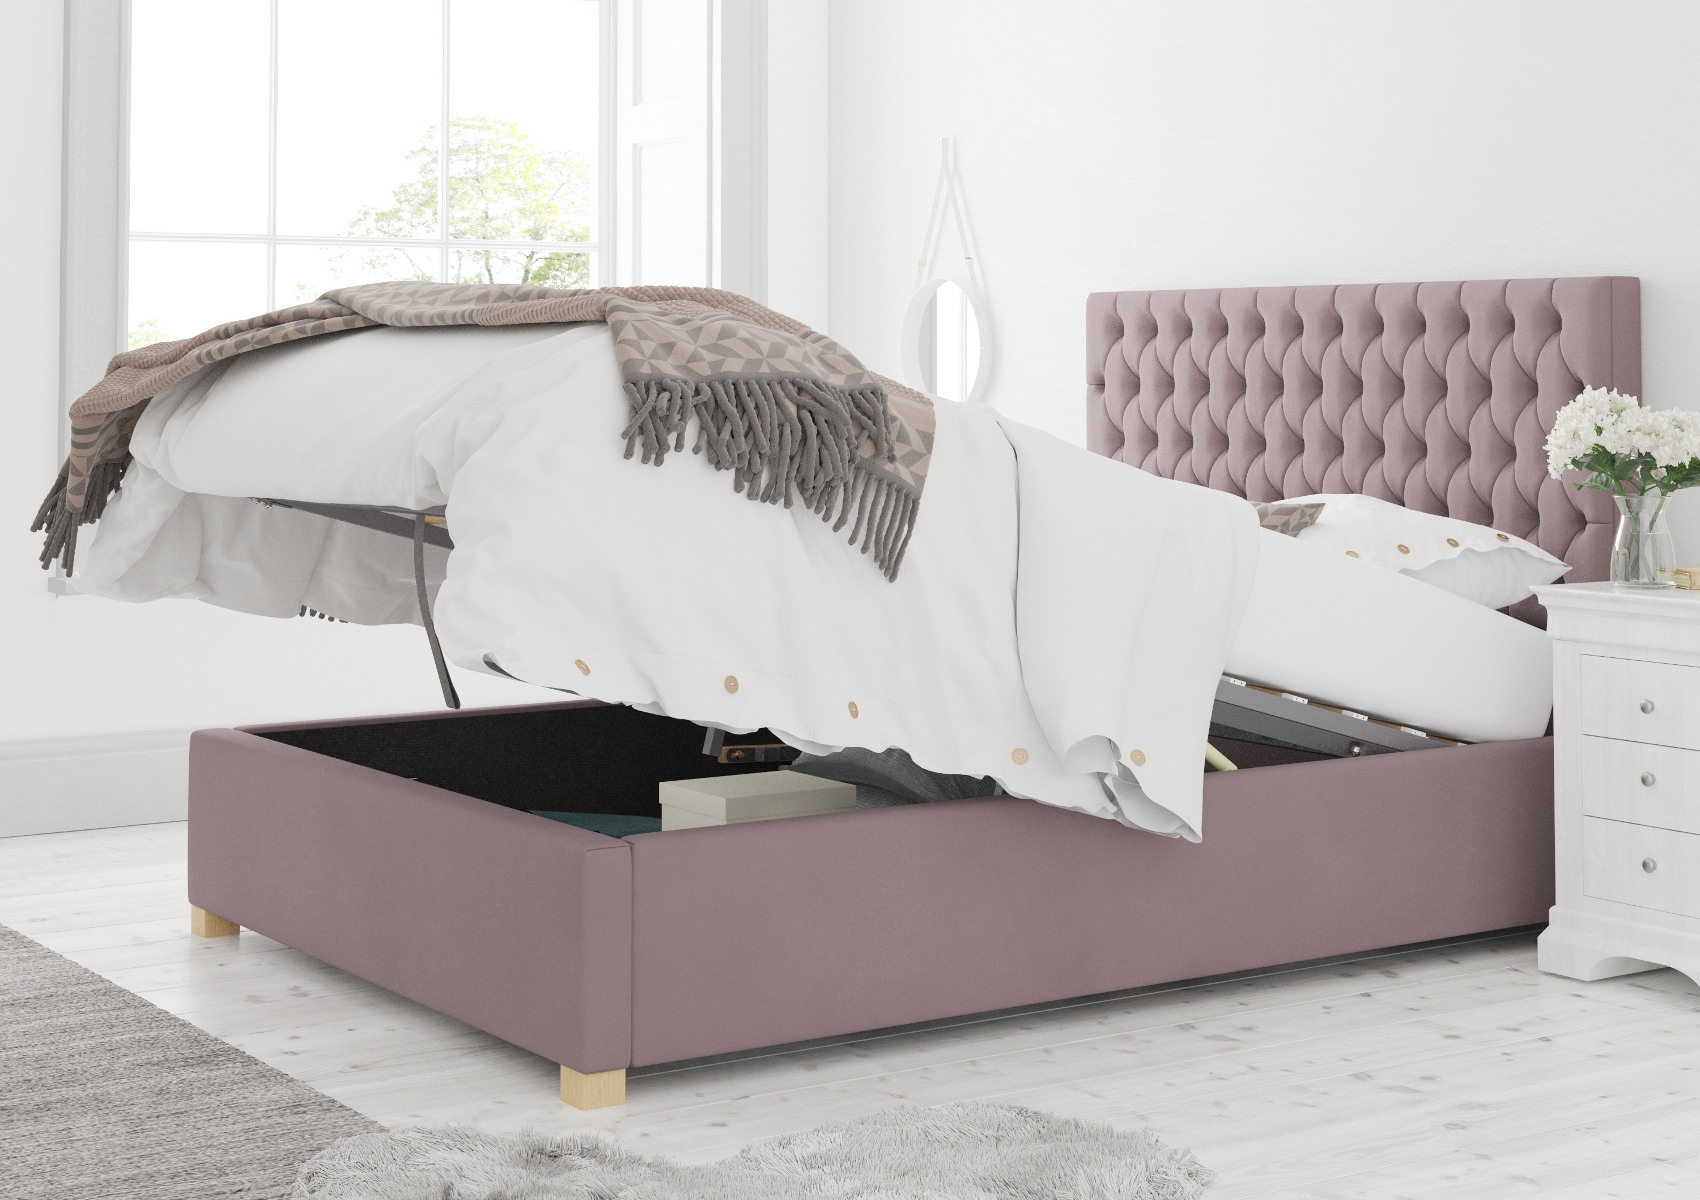 View Malton Blush Upholstered Double Ottoman Bed Time4Sleep information